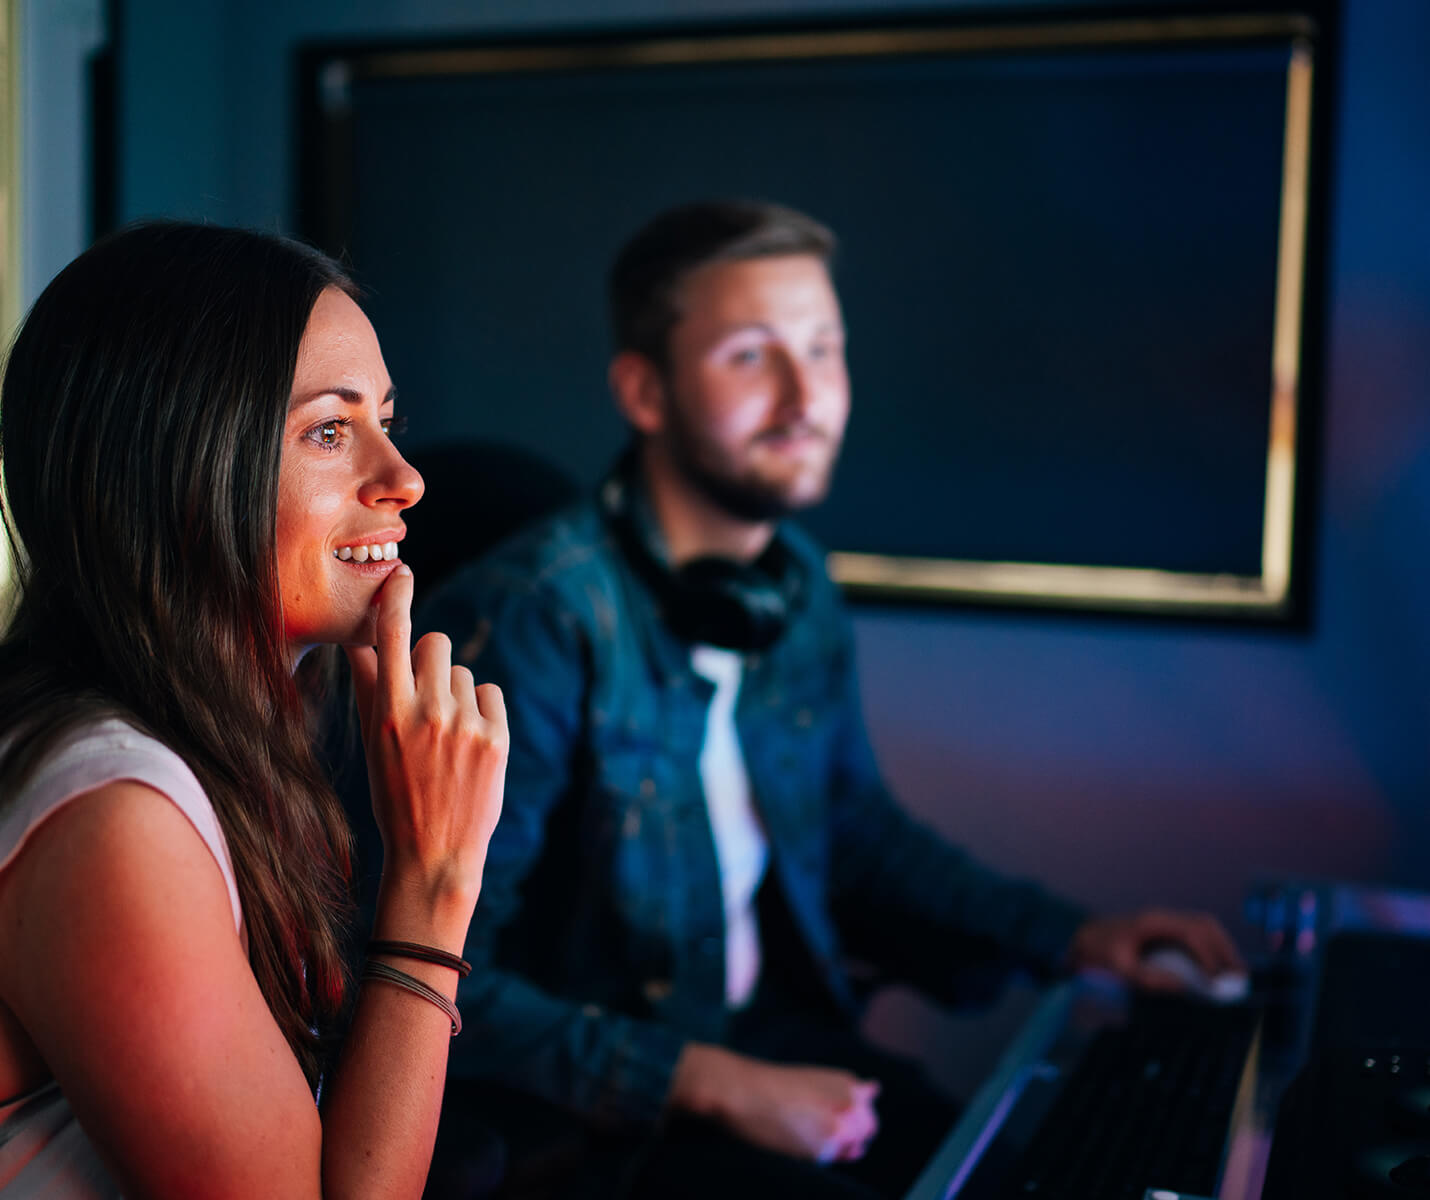 Girl and guy sit in front of screen